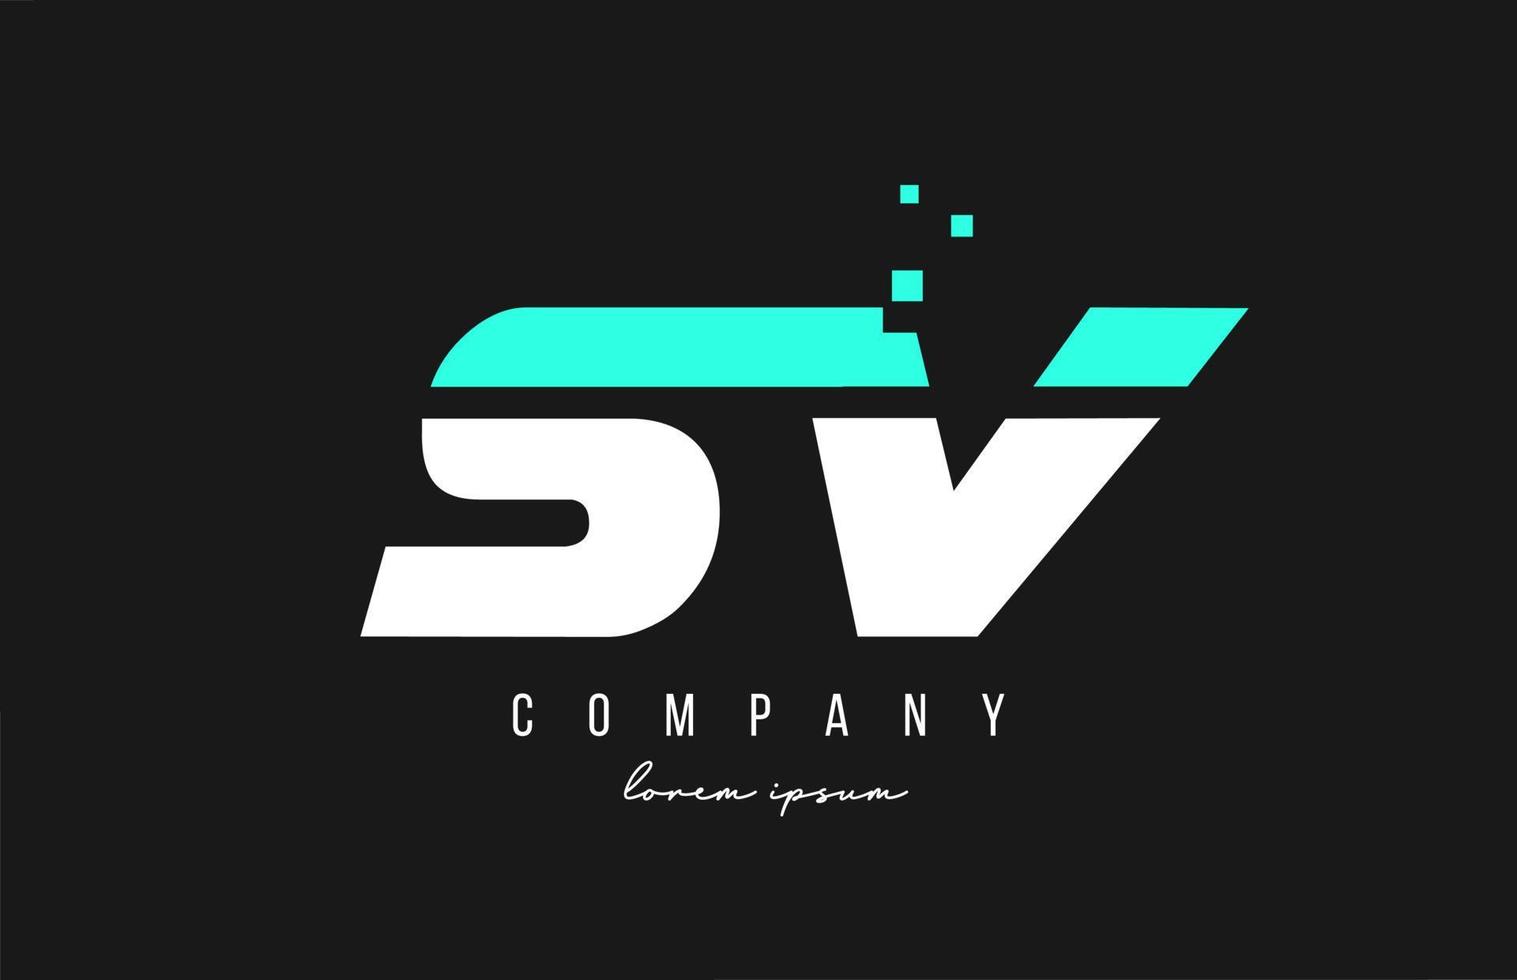 sv s v alphabet letter logo combination in blue and white color. Creative icon design for business and company vector